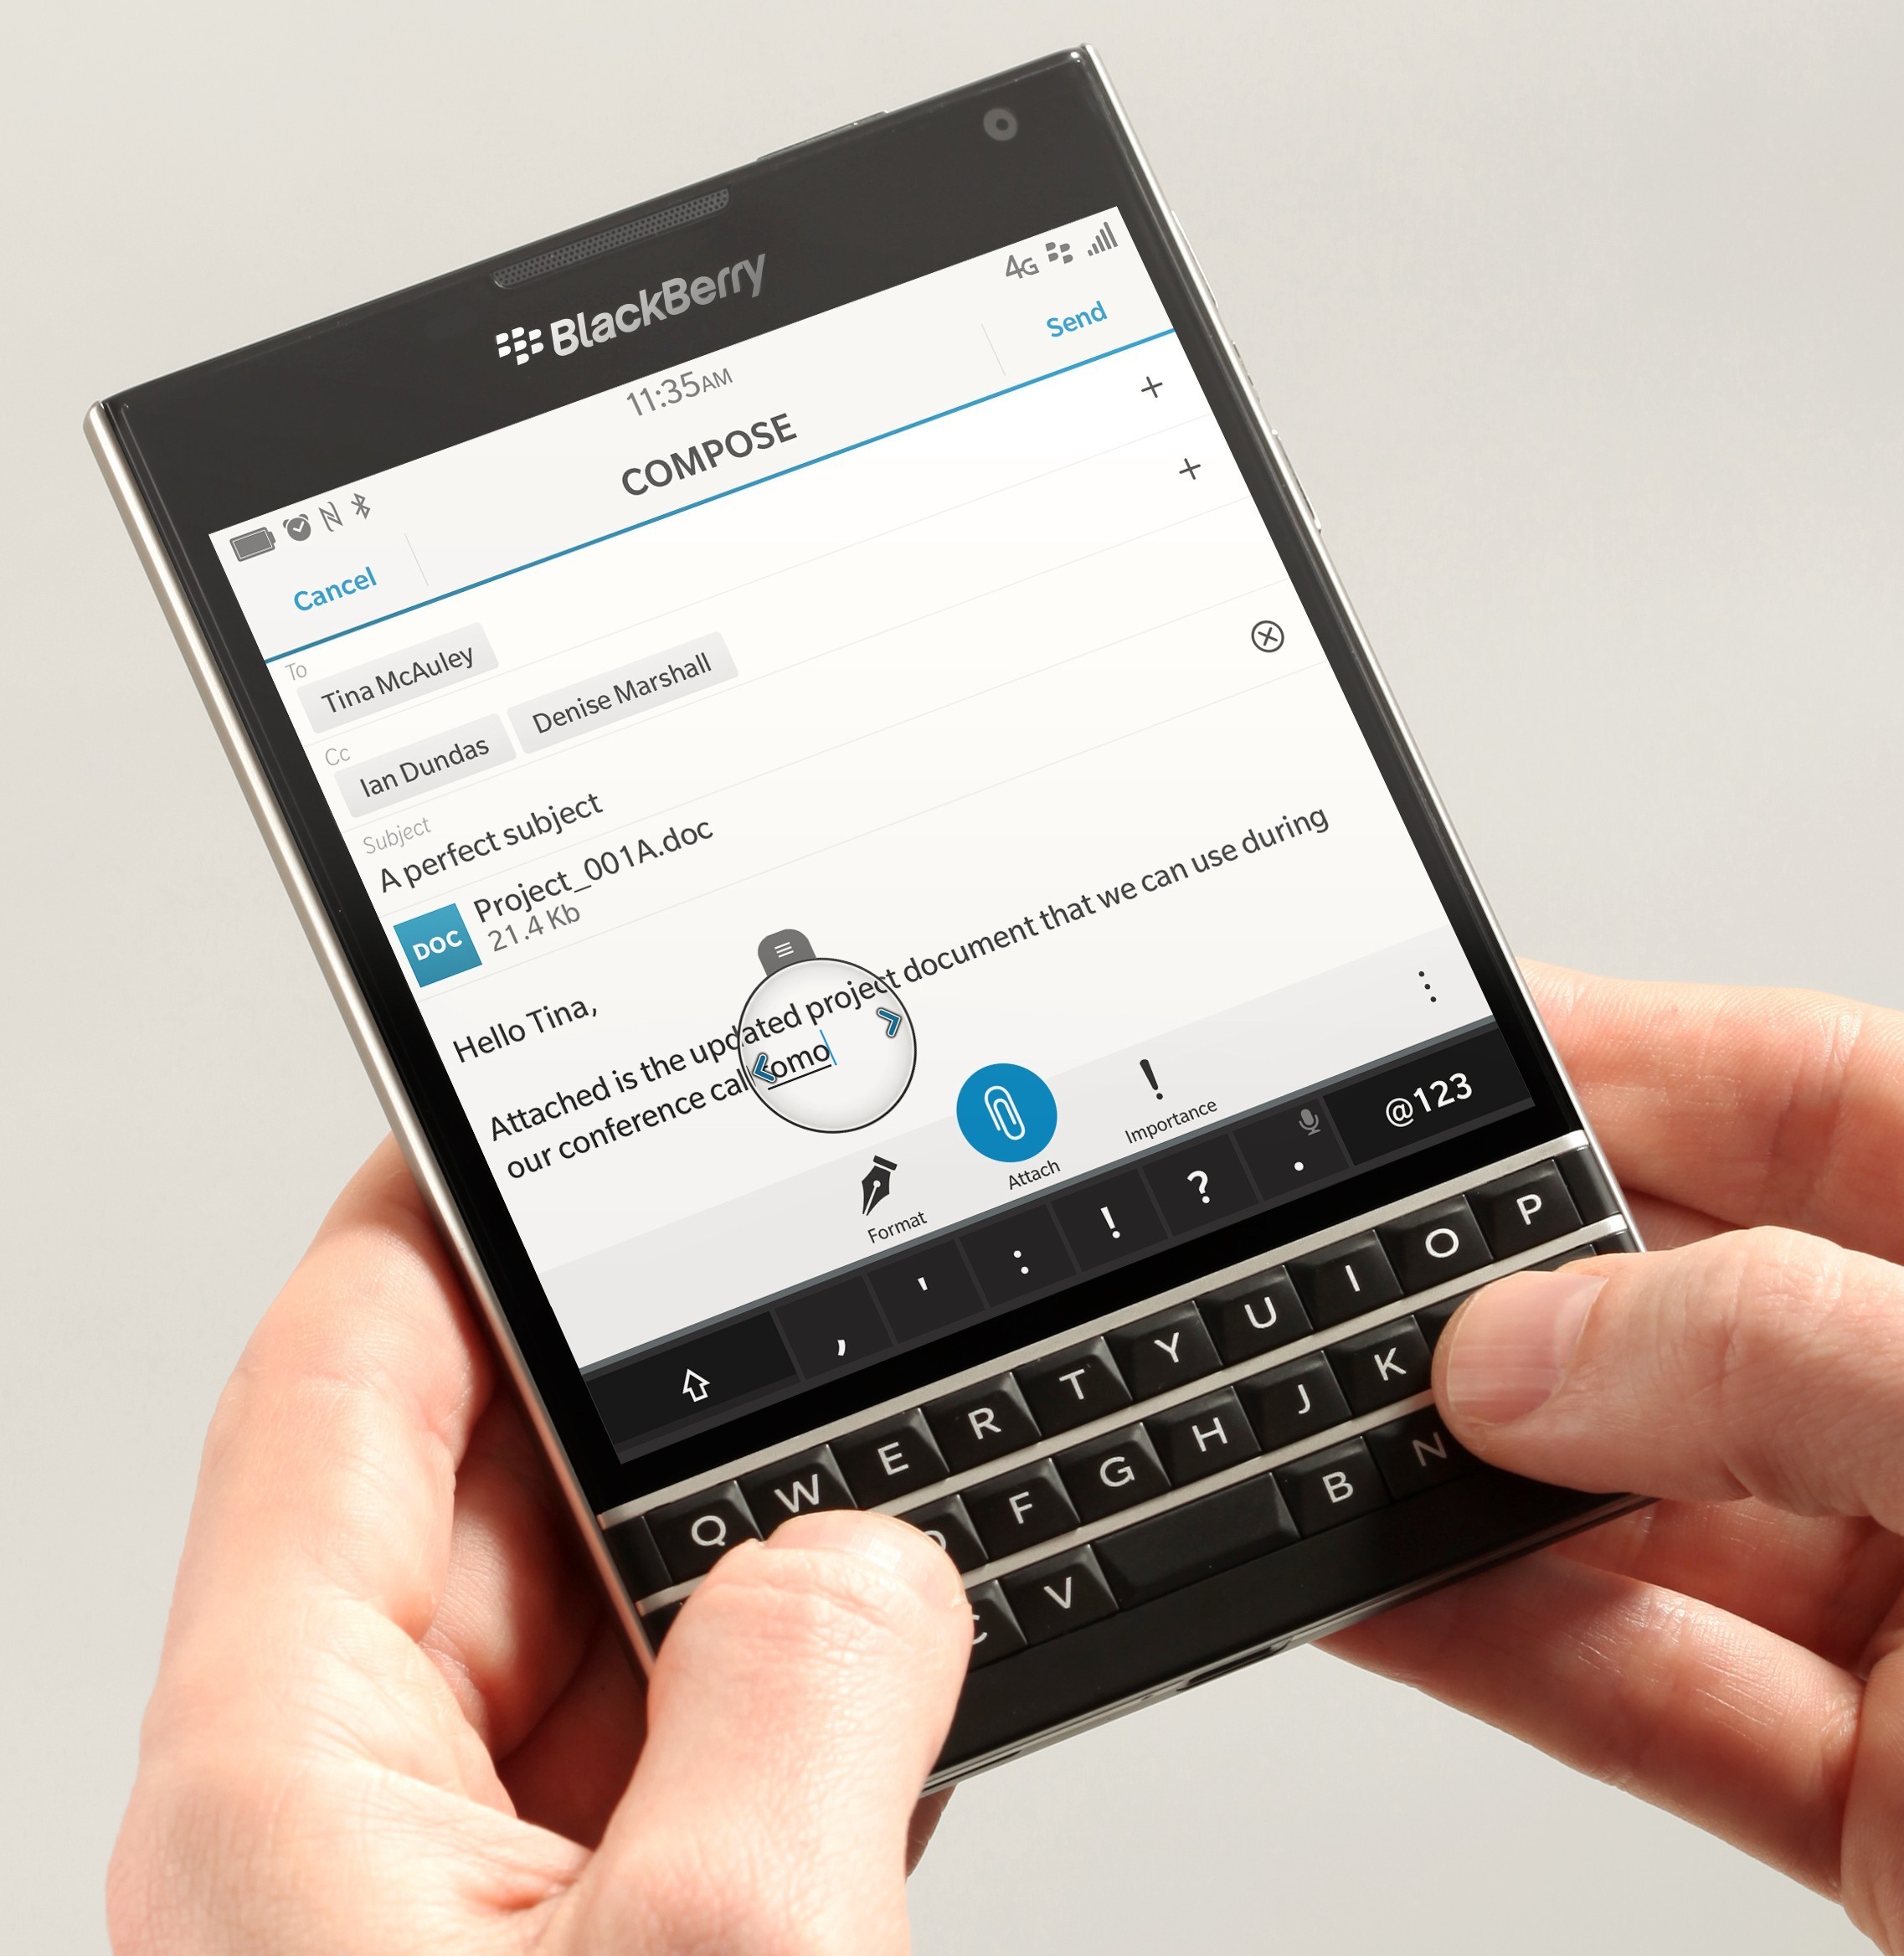 BlackBerry Passport Will Sell for $599, CEO Confirms [WSJ]